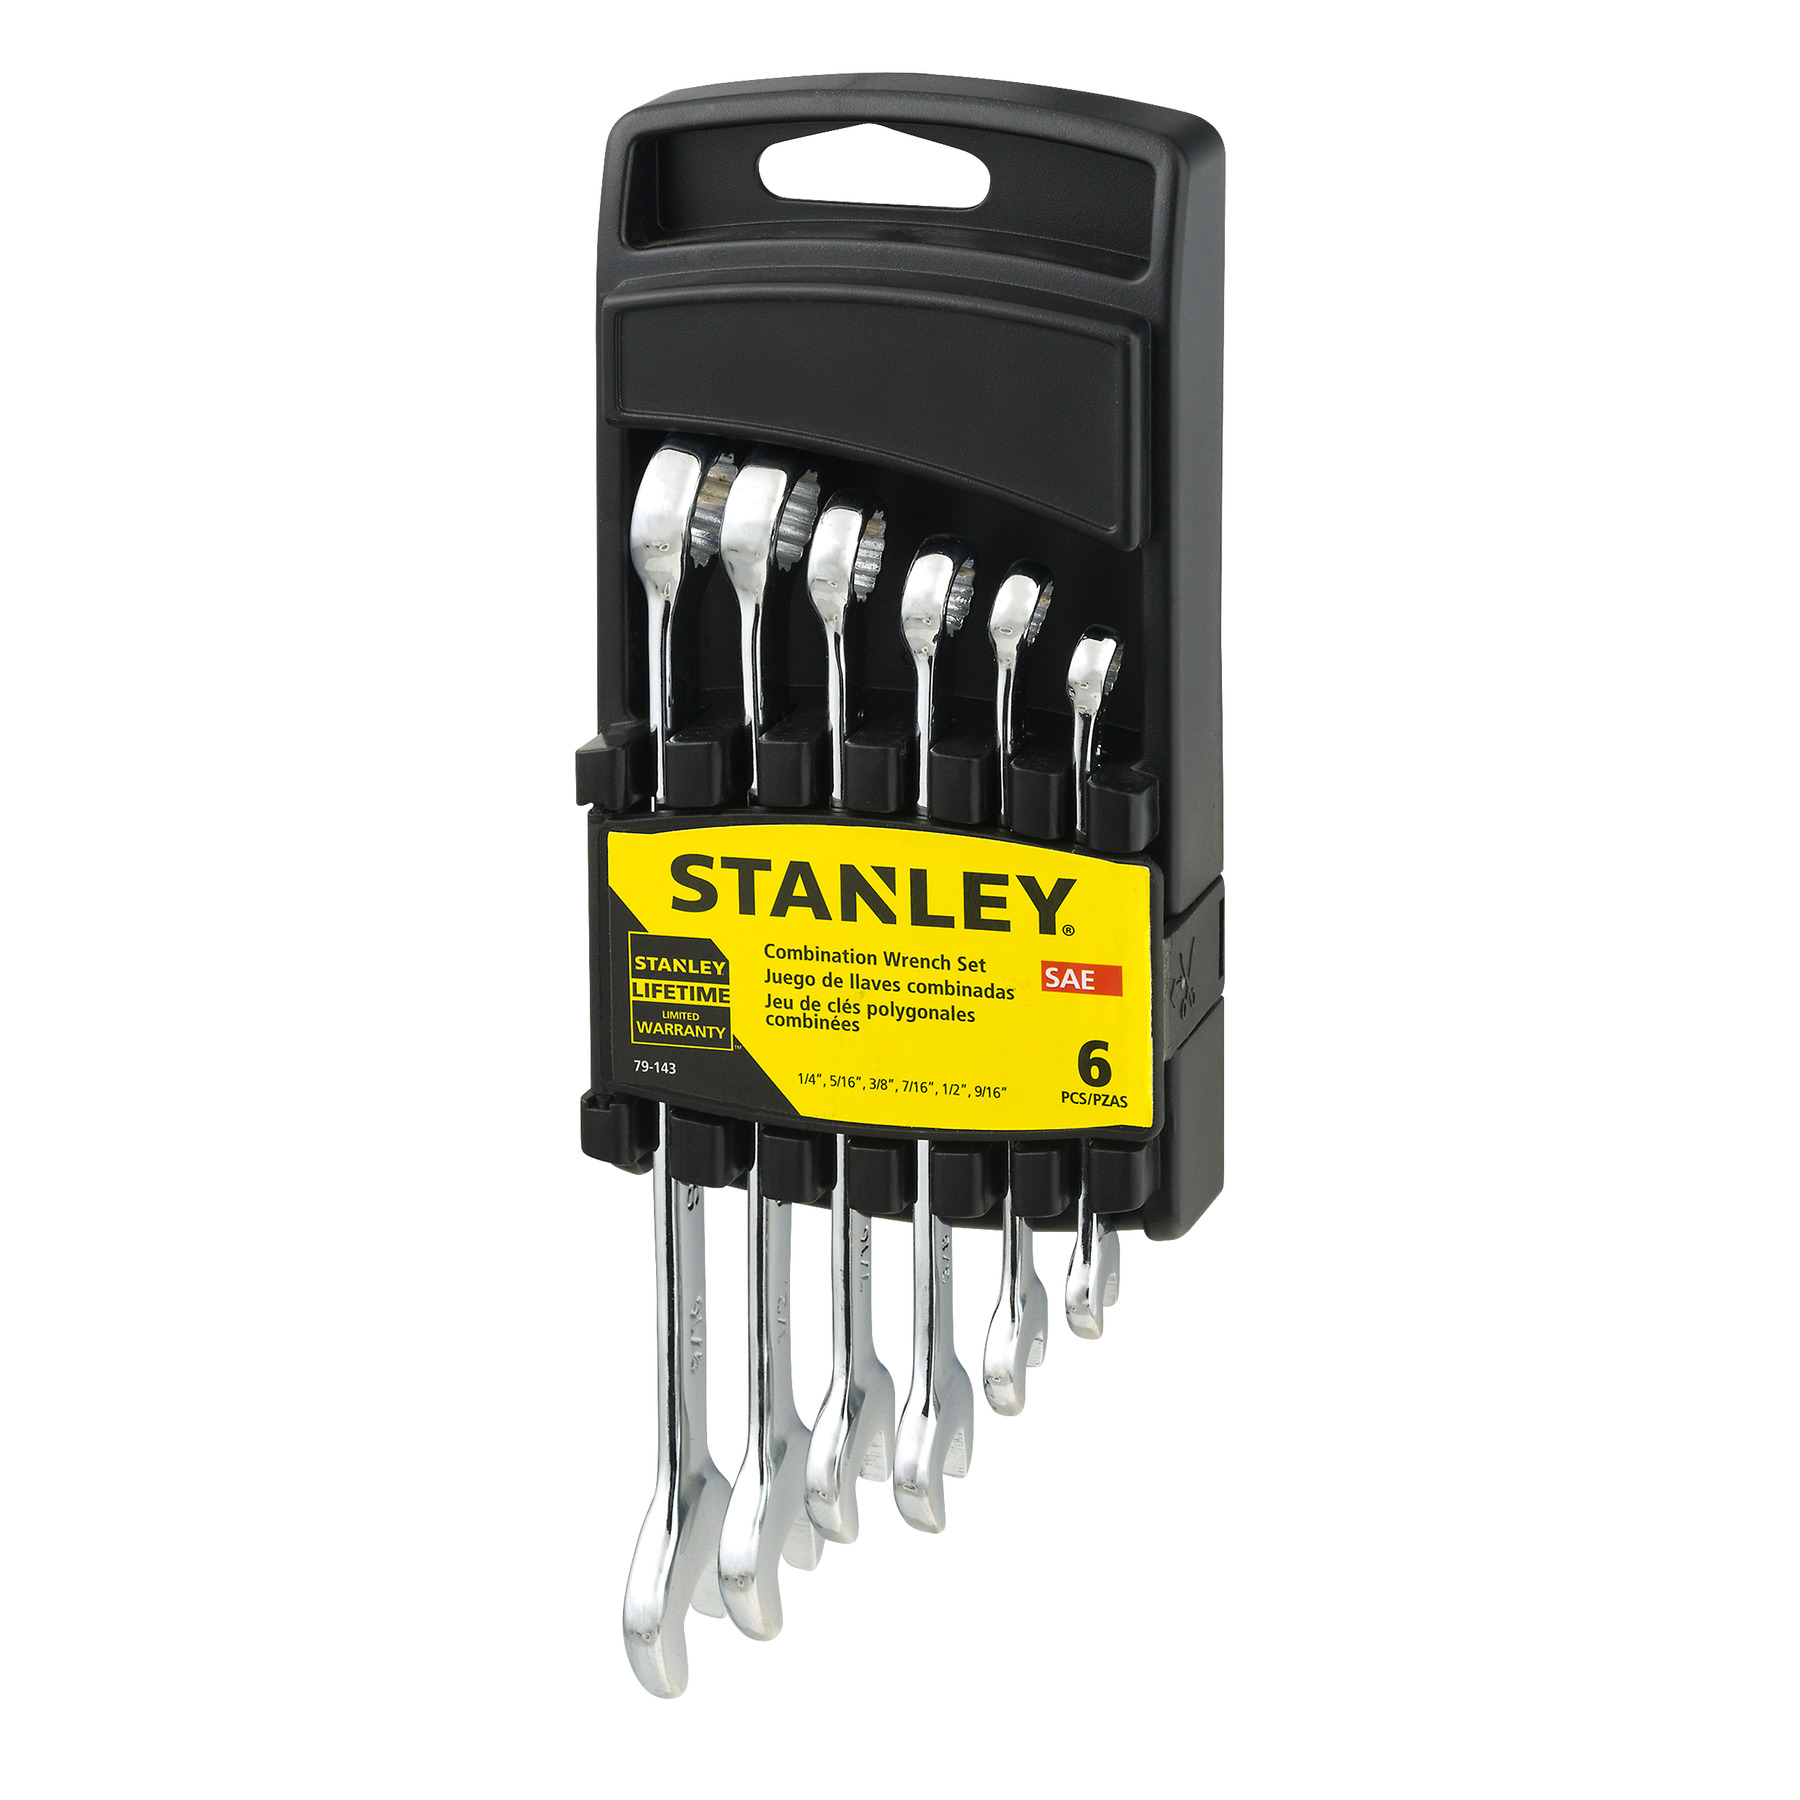 Stanley Combination Wrench Set - 6 PC, 6.0 PIECE(S) - image 3 of 5